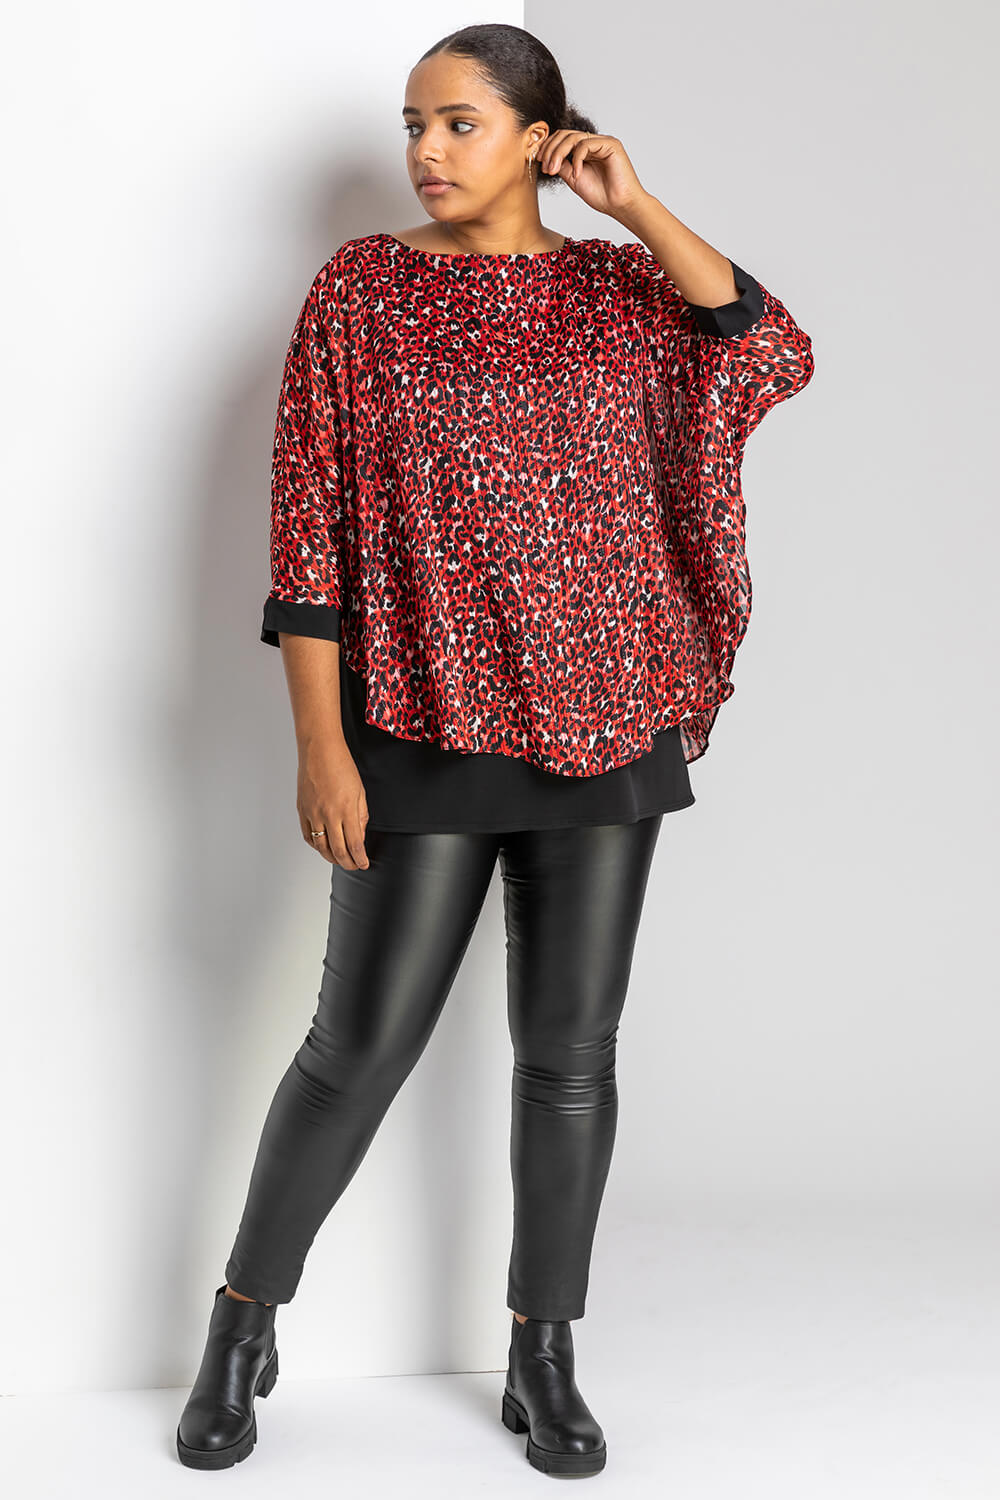 Red Curve Animal Print Overlay Top, Image 3 of 5